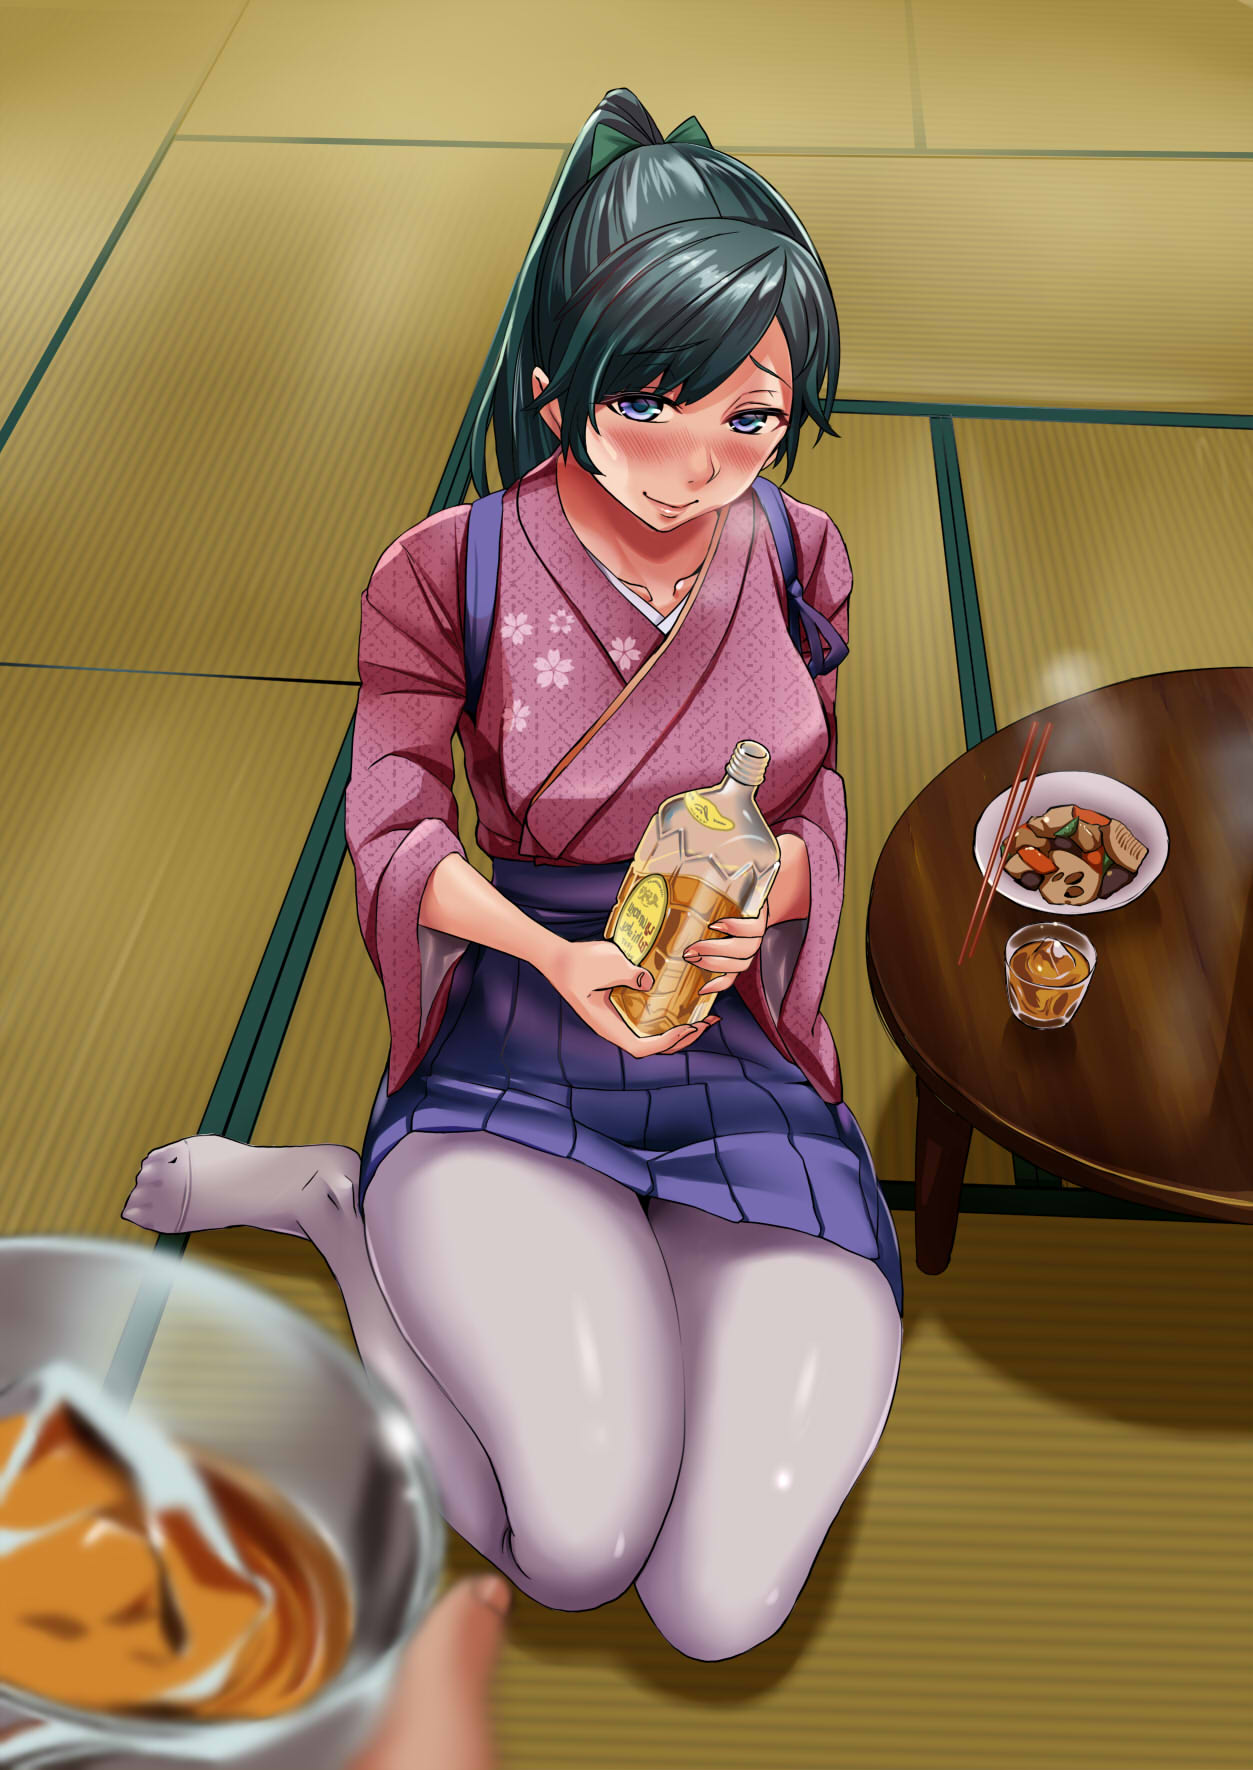 1girl bangs beans blue_eyes blurry blush bow bowl carrot chopsticks closed_mouth comic cup drinking_glass fingers floral_print food from_above ginjuuji green_bow green_hair hair_bow hakama_skirt highres holding_bottle holding_drinking_glass houshou_(kantai_collection) ice_cube indoors japanese_clothes kantai_collection kimono long_hair looking_at_viewer mushroom no_shoes on_floor out_of_frame pantyhose parted_bangs pleated_skirt ponytail shade sitting skirt smile solo_focus steam stew tasuki tatami transparent white_legwear wine_bottle wooden_table